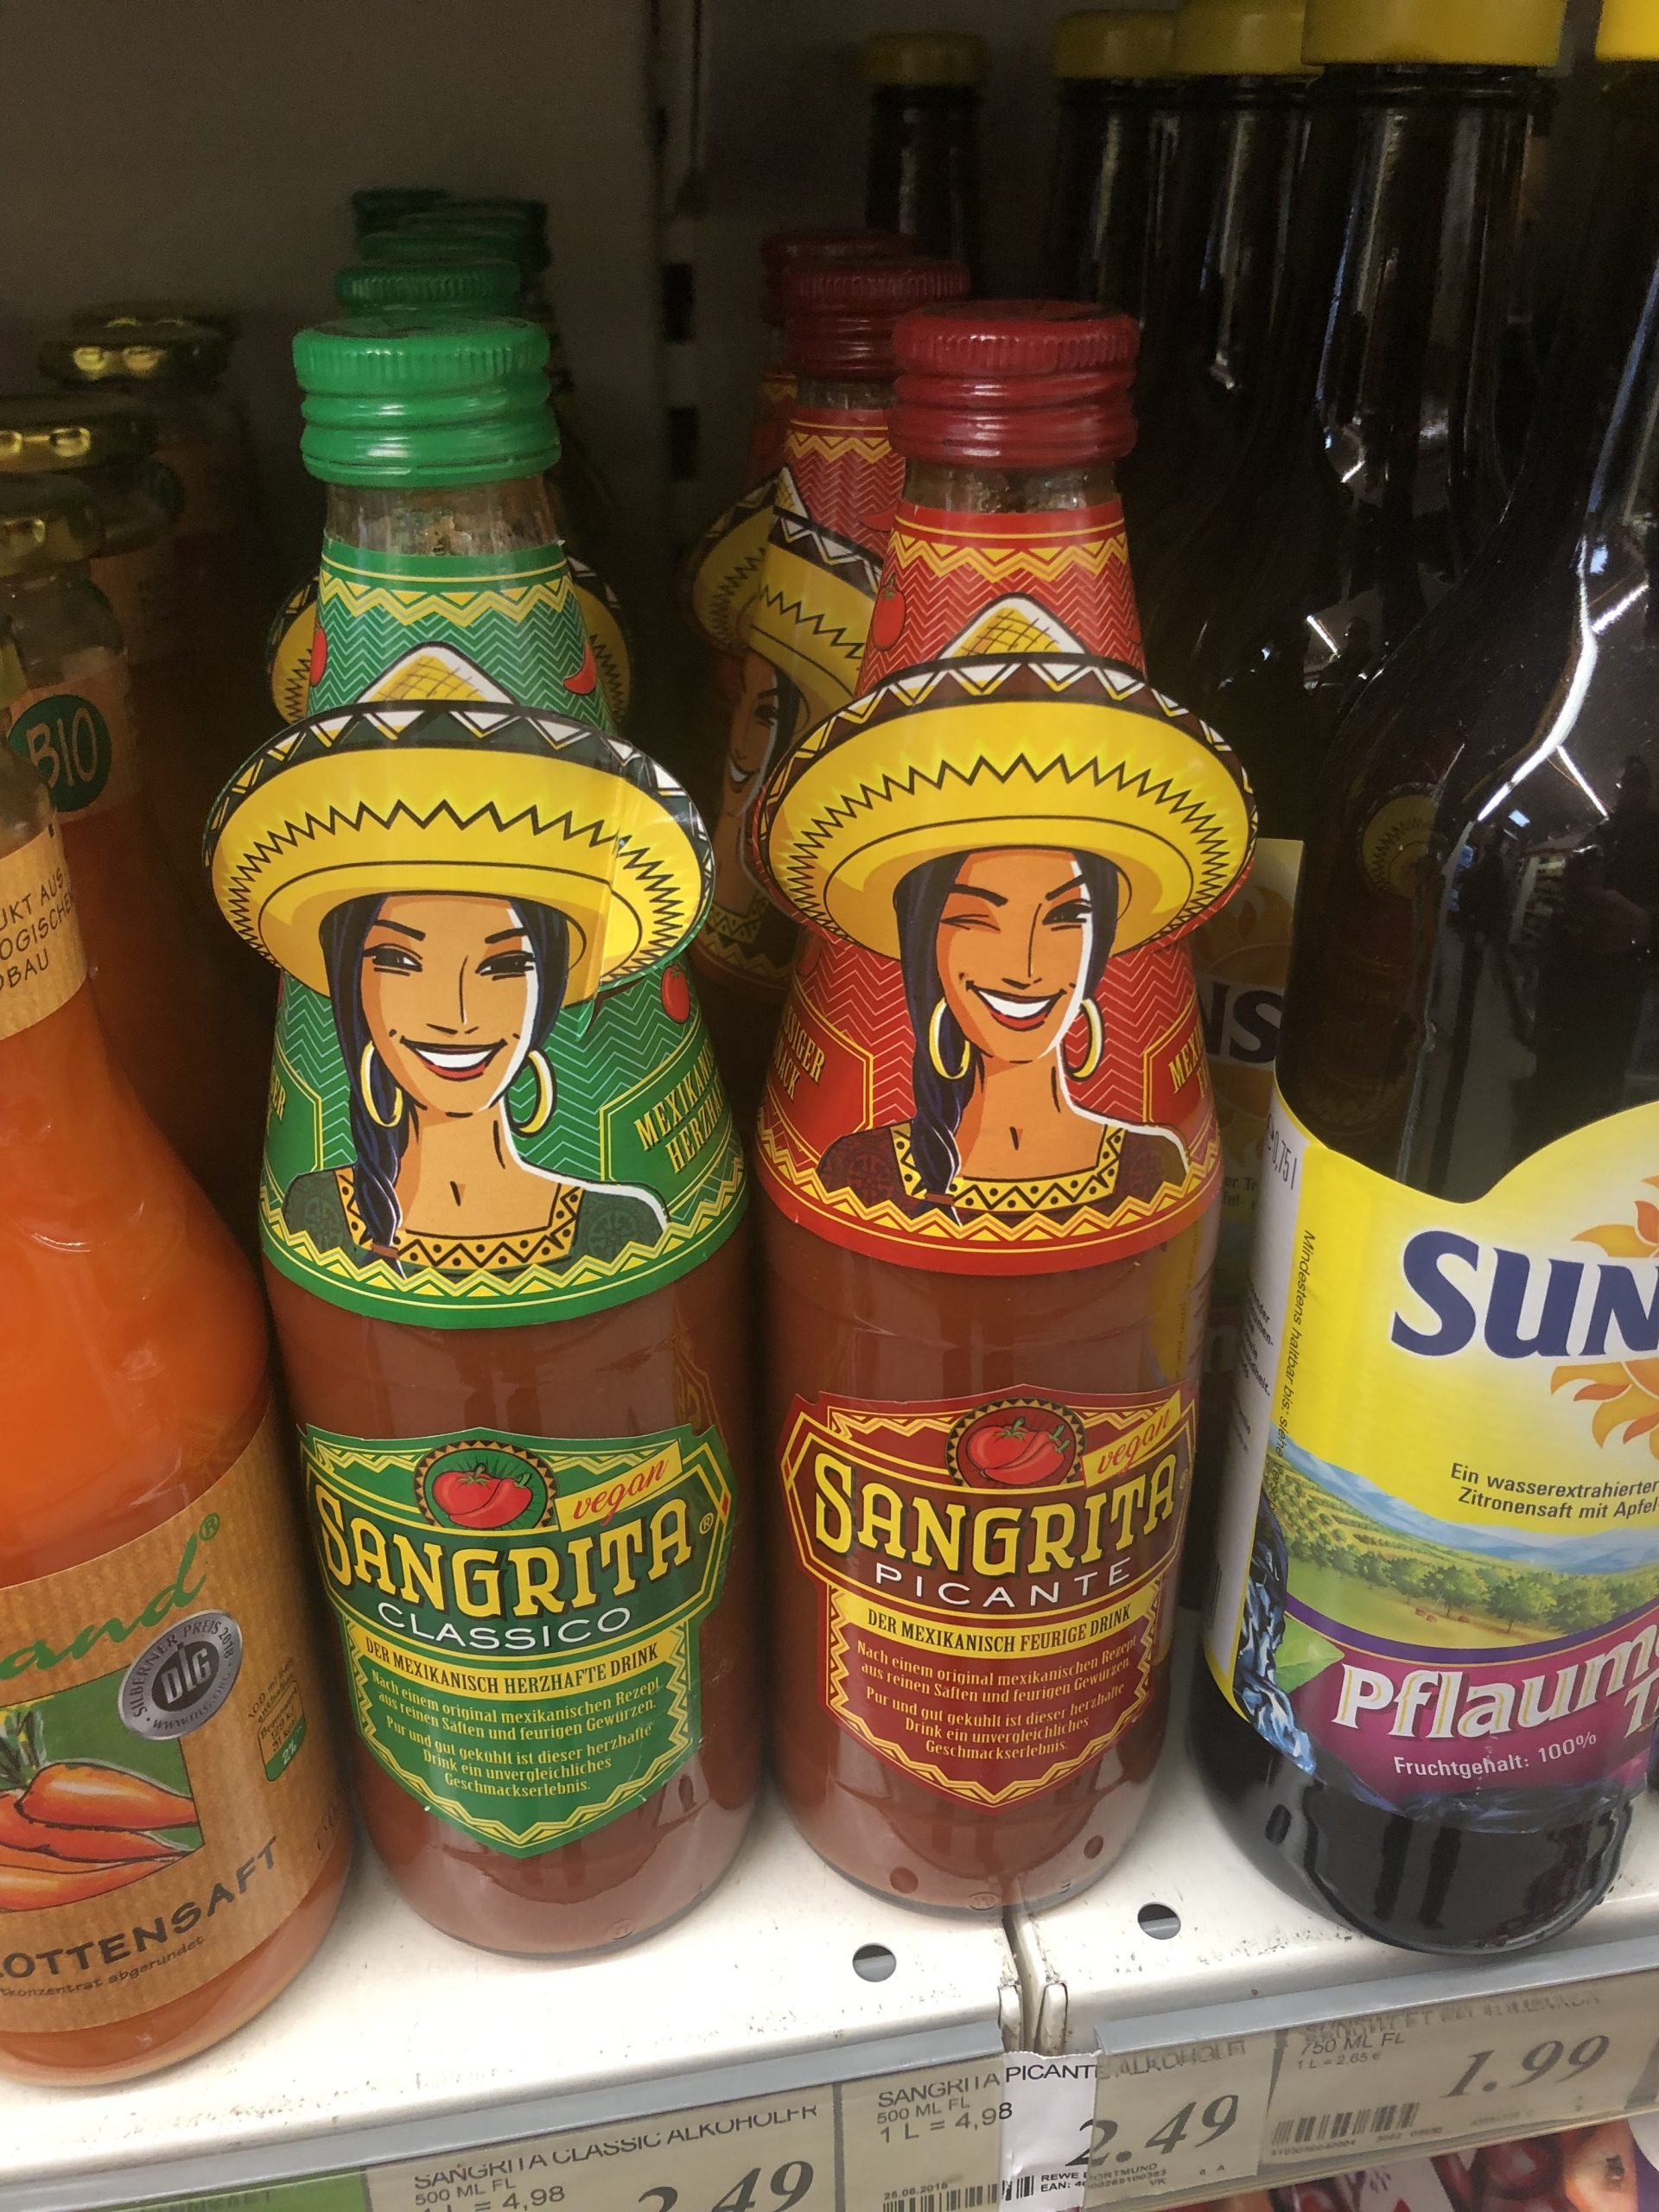 Mexican drinks, Non-alcoholic drinks in Mexico, Mexican beverages, Sangrita